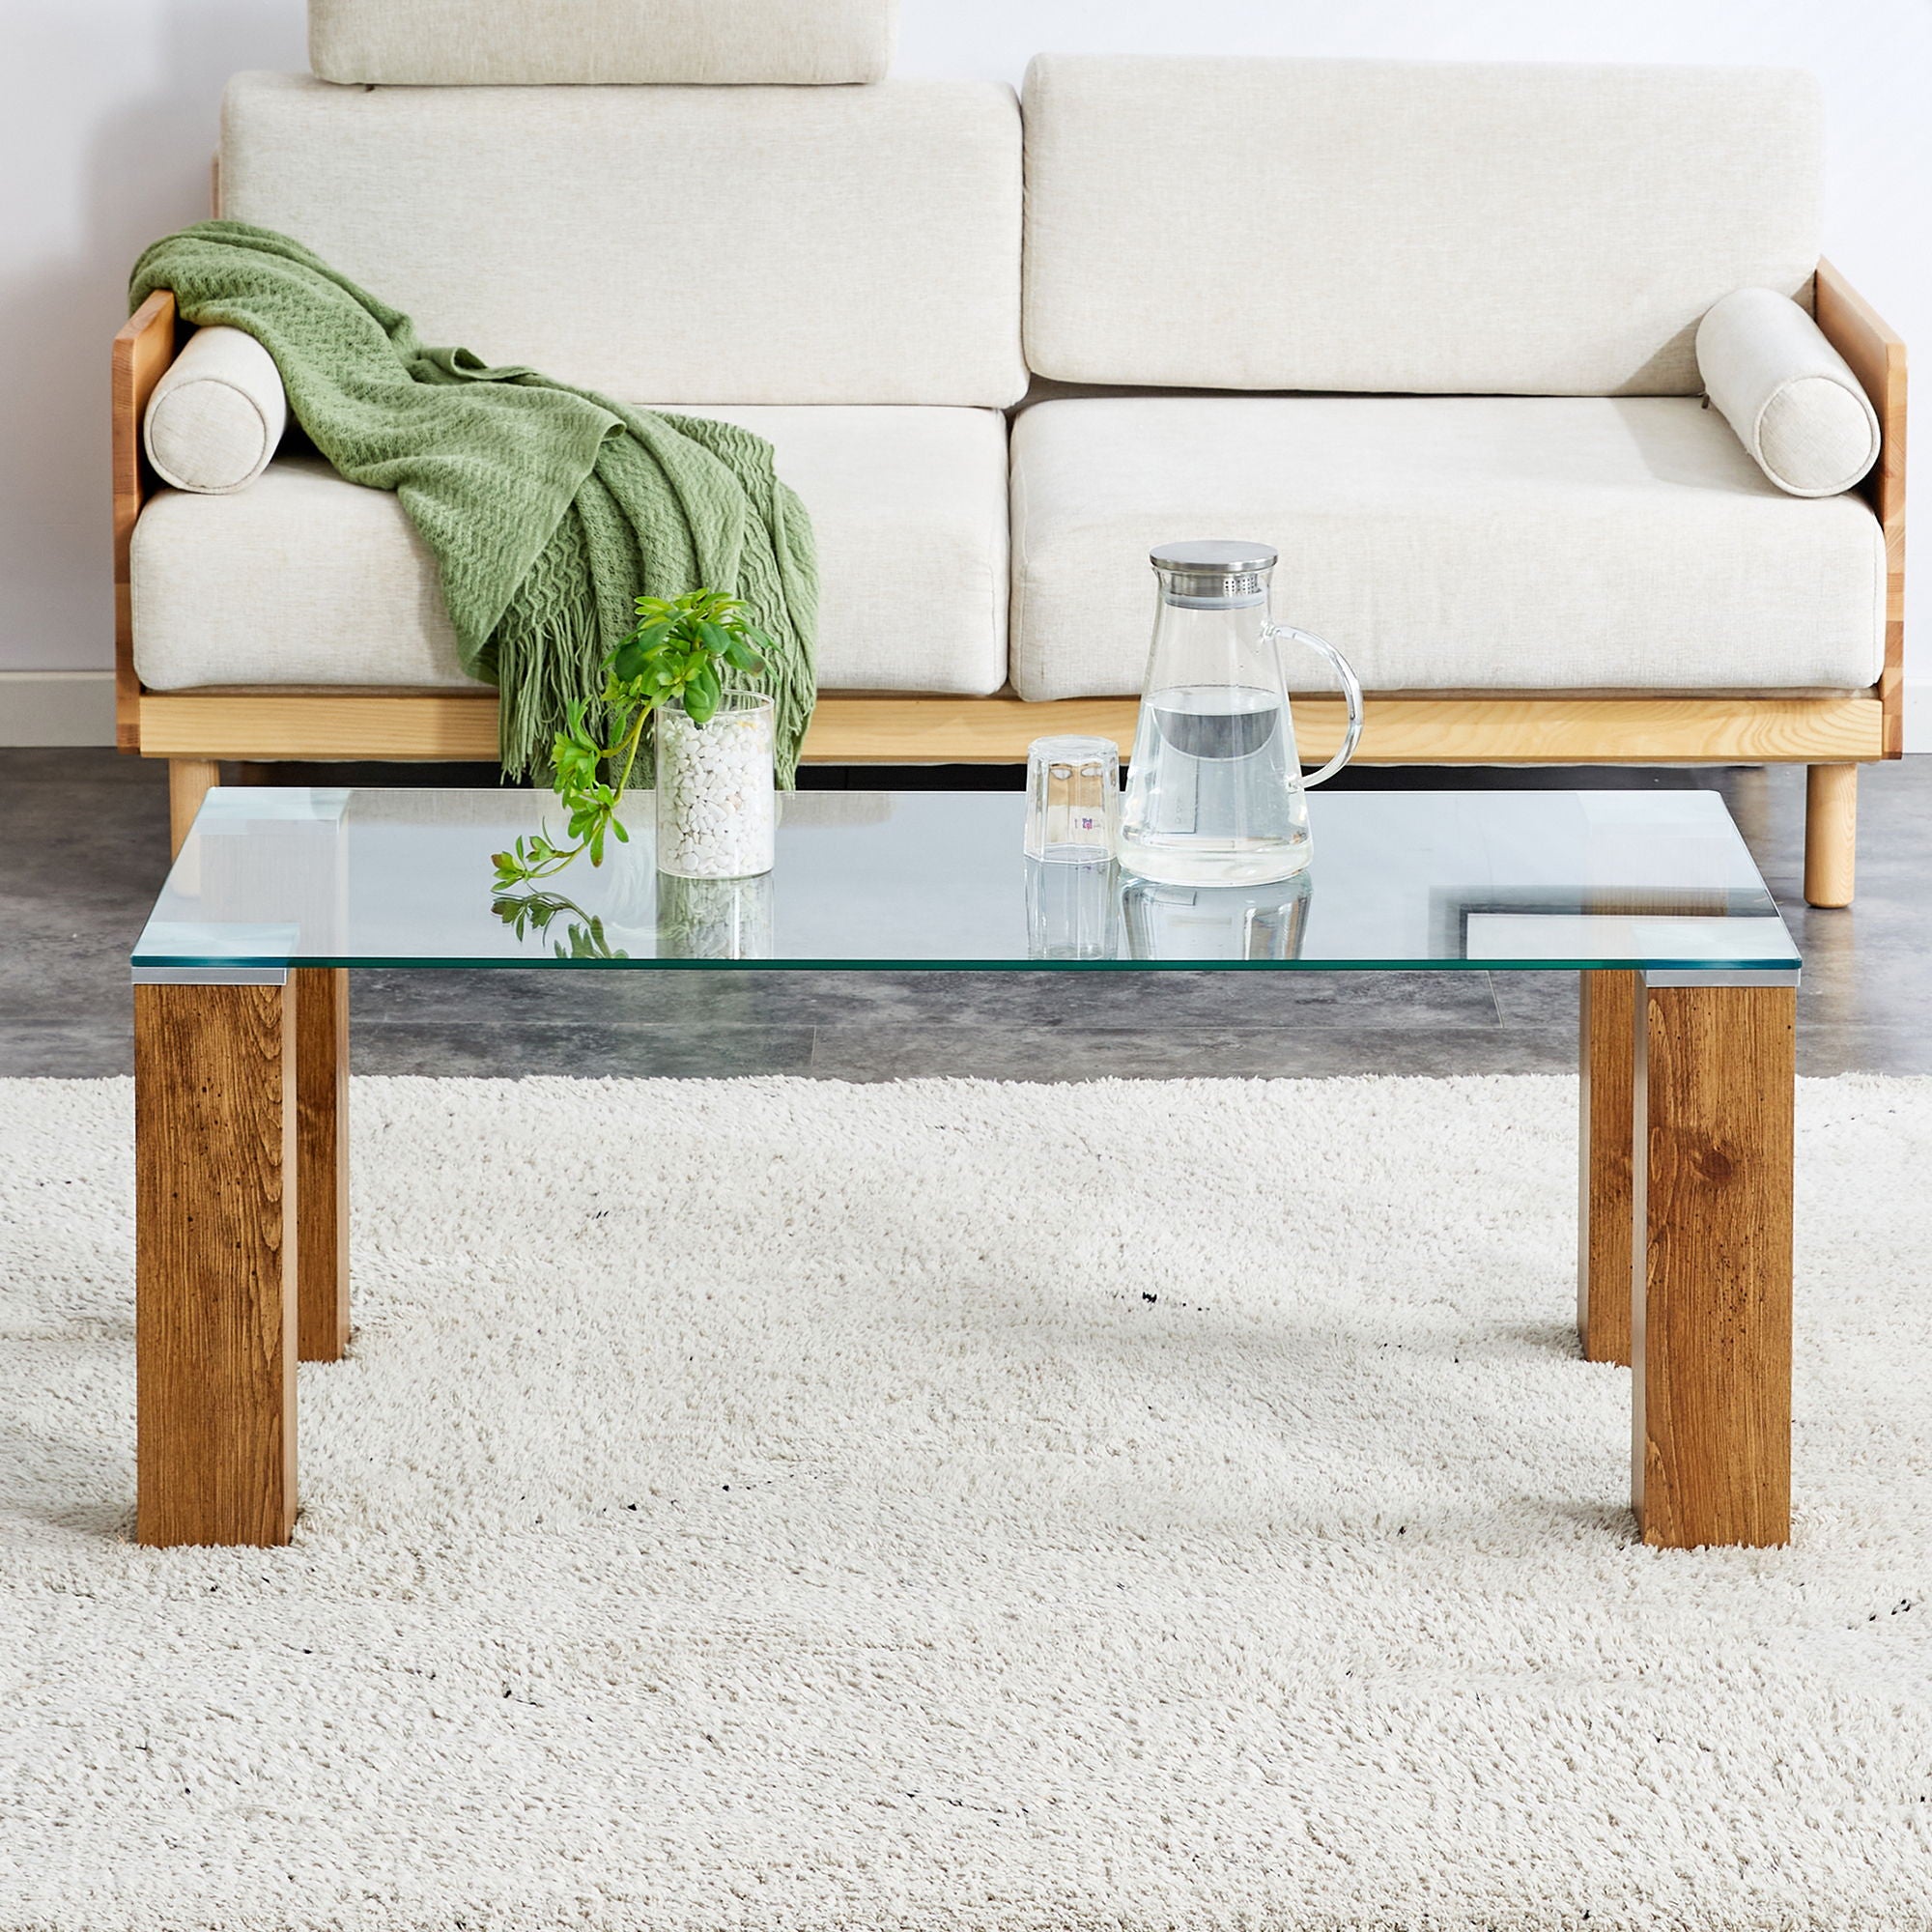 Glass-Top Coffee Table, Tea Table, With MDF Legs - Stylish Blend Of Elegance And Durability 44.9"*21.7"*16.9"